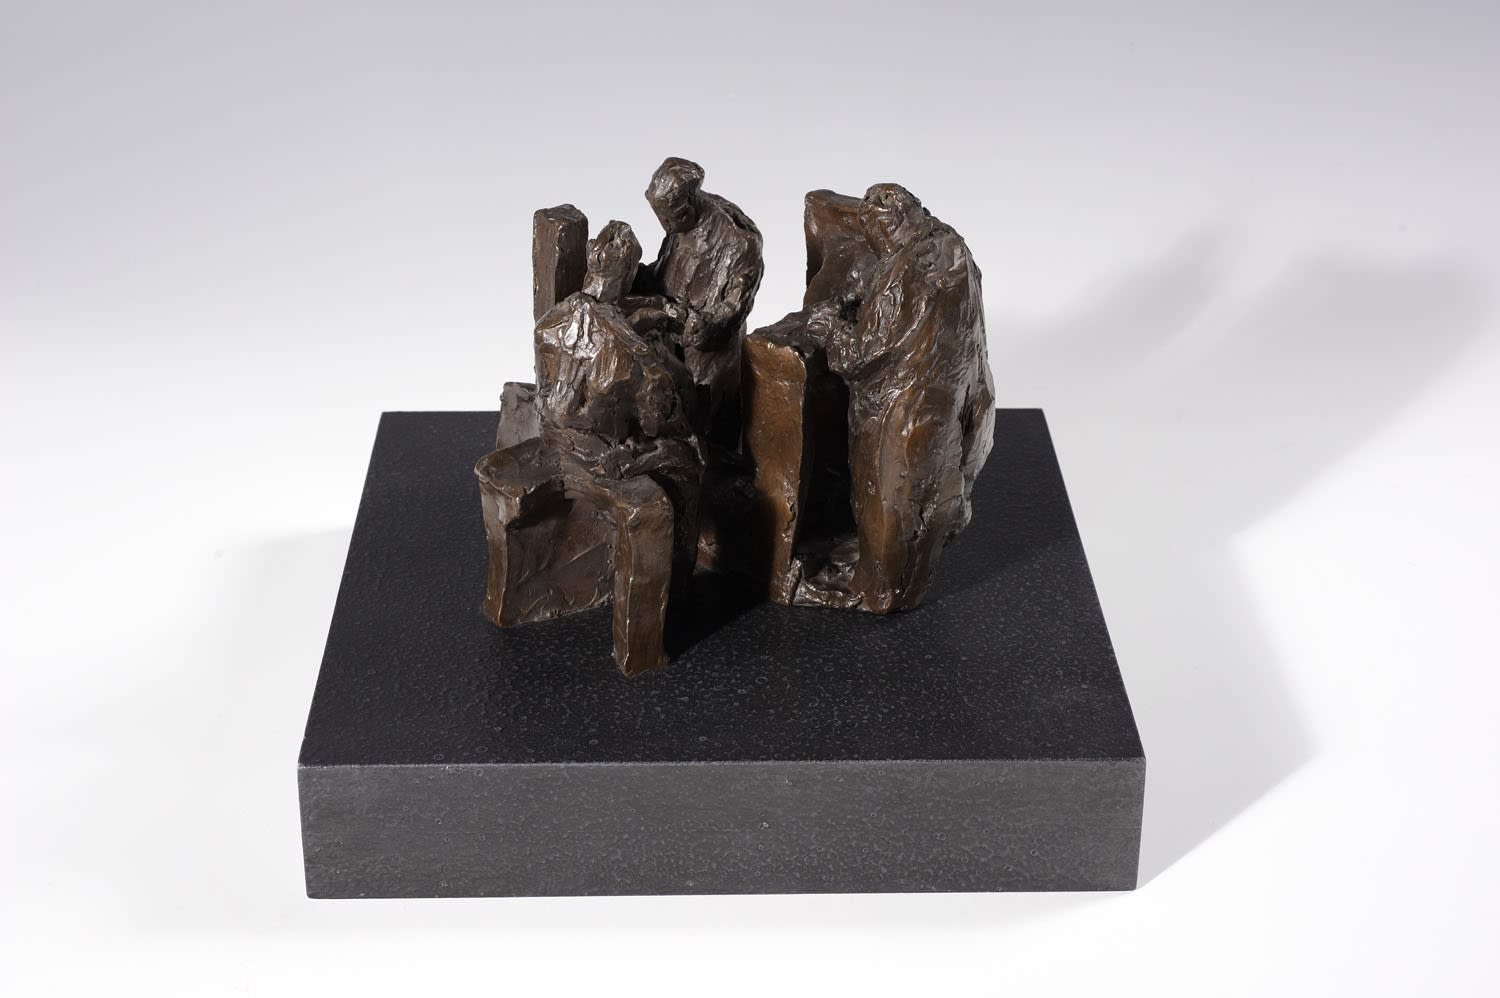 Ghisha Koenig (1921-1993) Compositors VI 1961 Bronze on wooden base 20 x 26.7 x 26.7 cm Ben Uri Collection © Ghisha Koenig estate To see and discover more about this artist click here